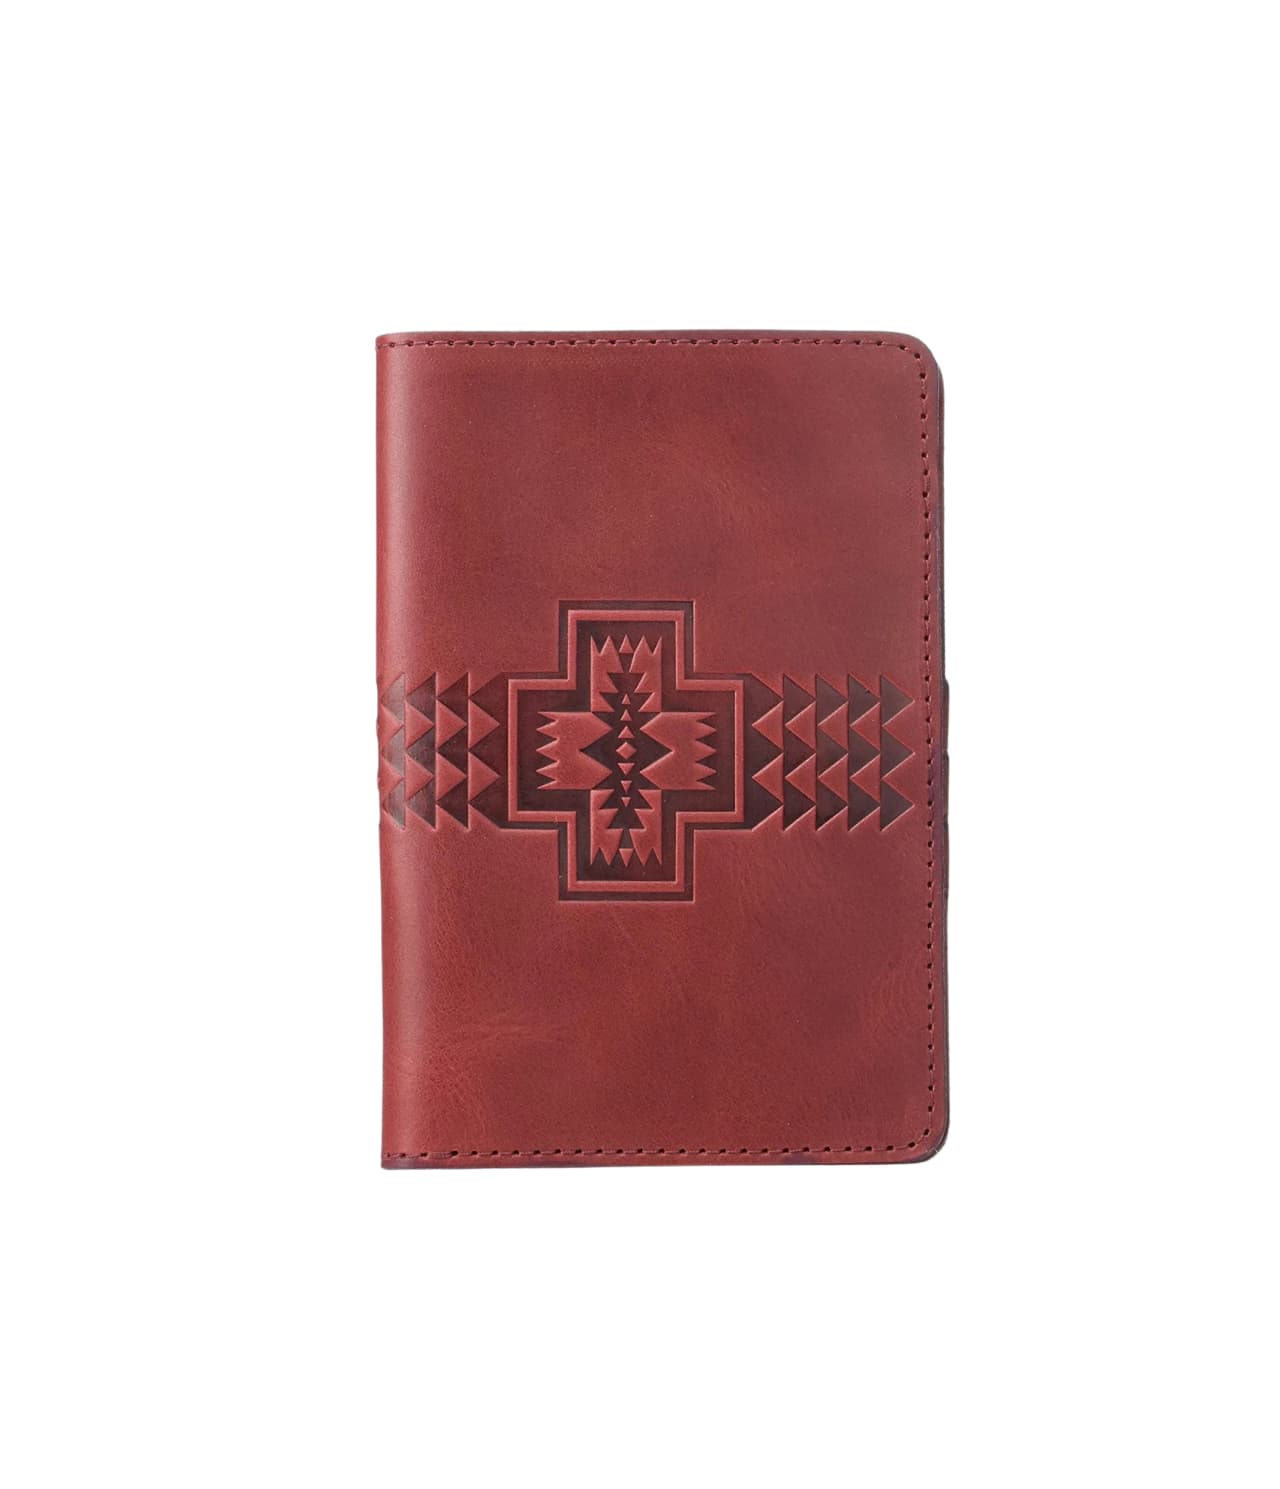 BAGAHOLICBOY SHOPS: 6 Designer Passport Cases To See The World